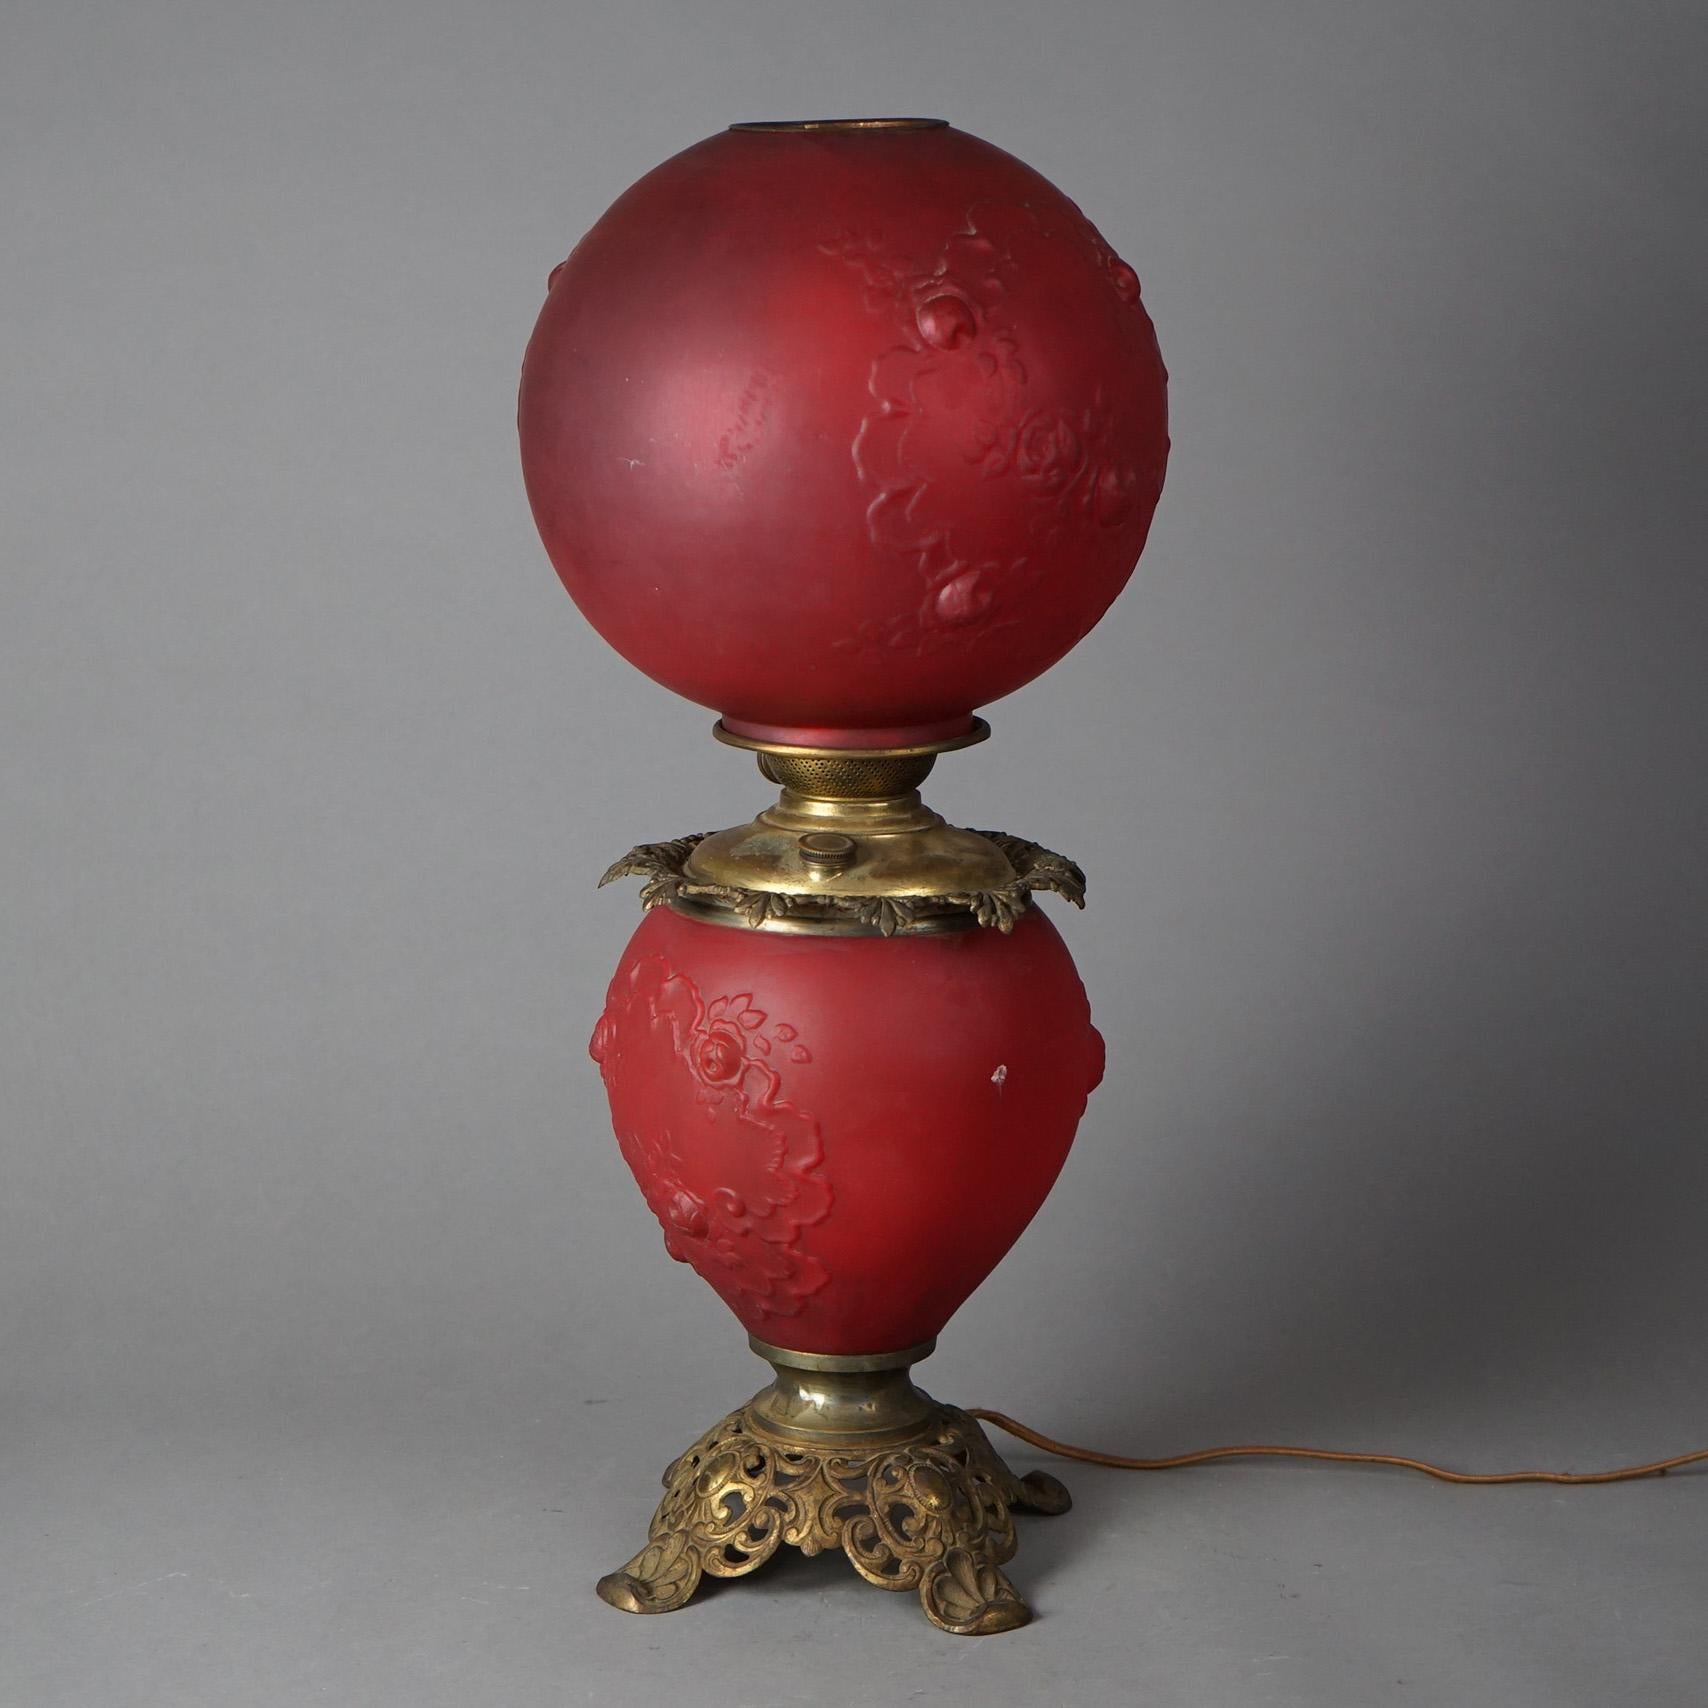 An antique Gone-With-The-Wind (GWW) table lamp offers cranberry glass font and globe with cast brass frame; electrified; c1890

Measures - 23.5